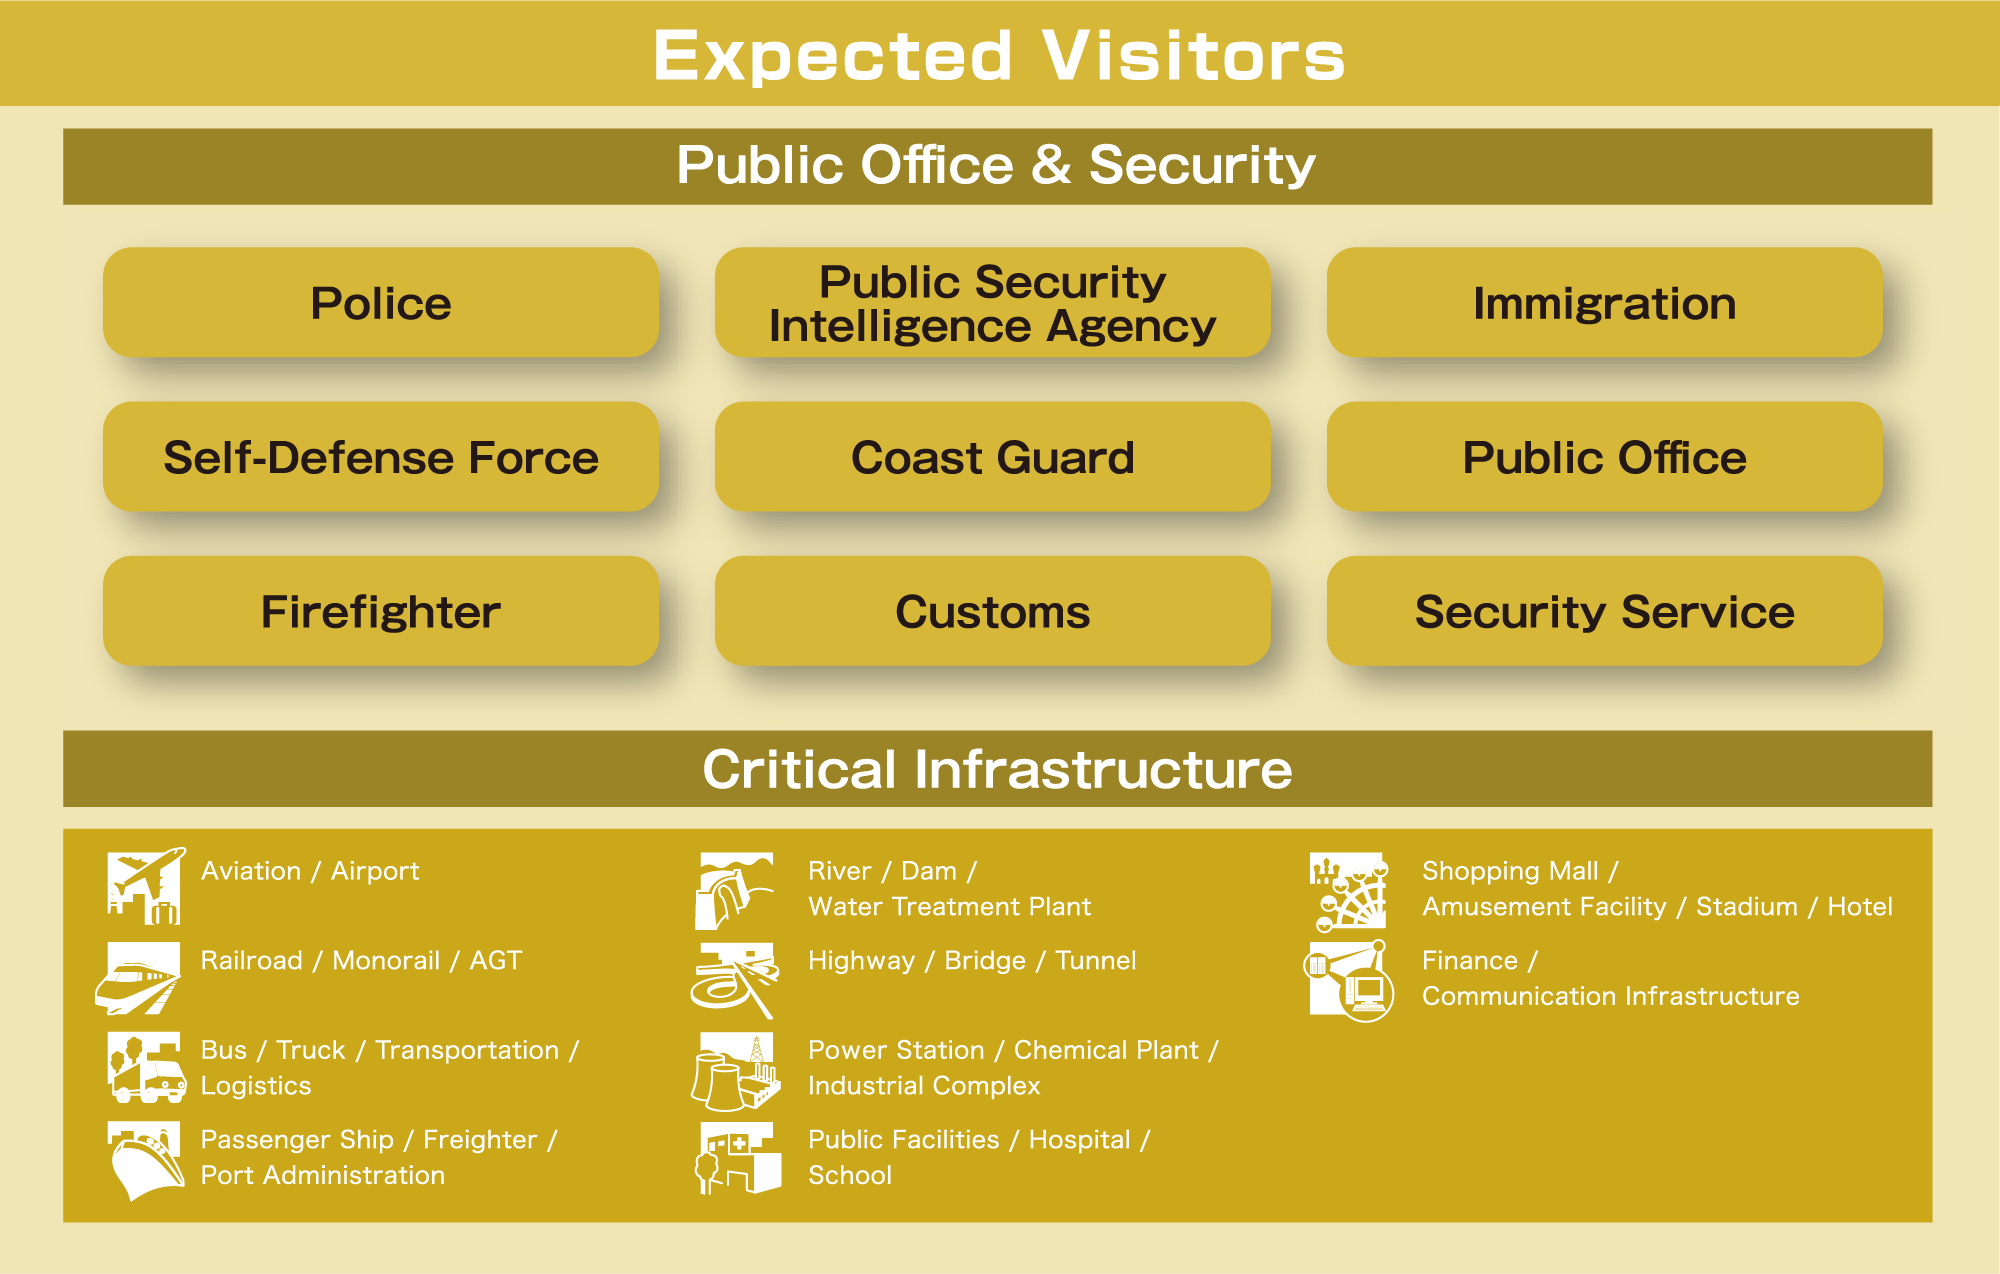 Expected Visitors